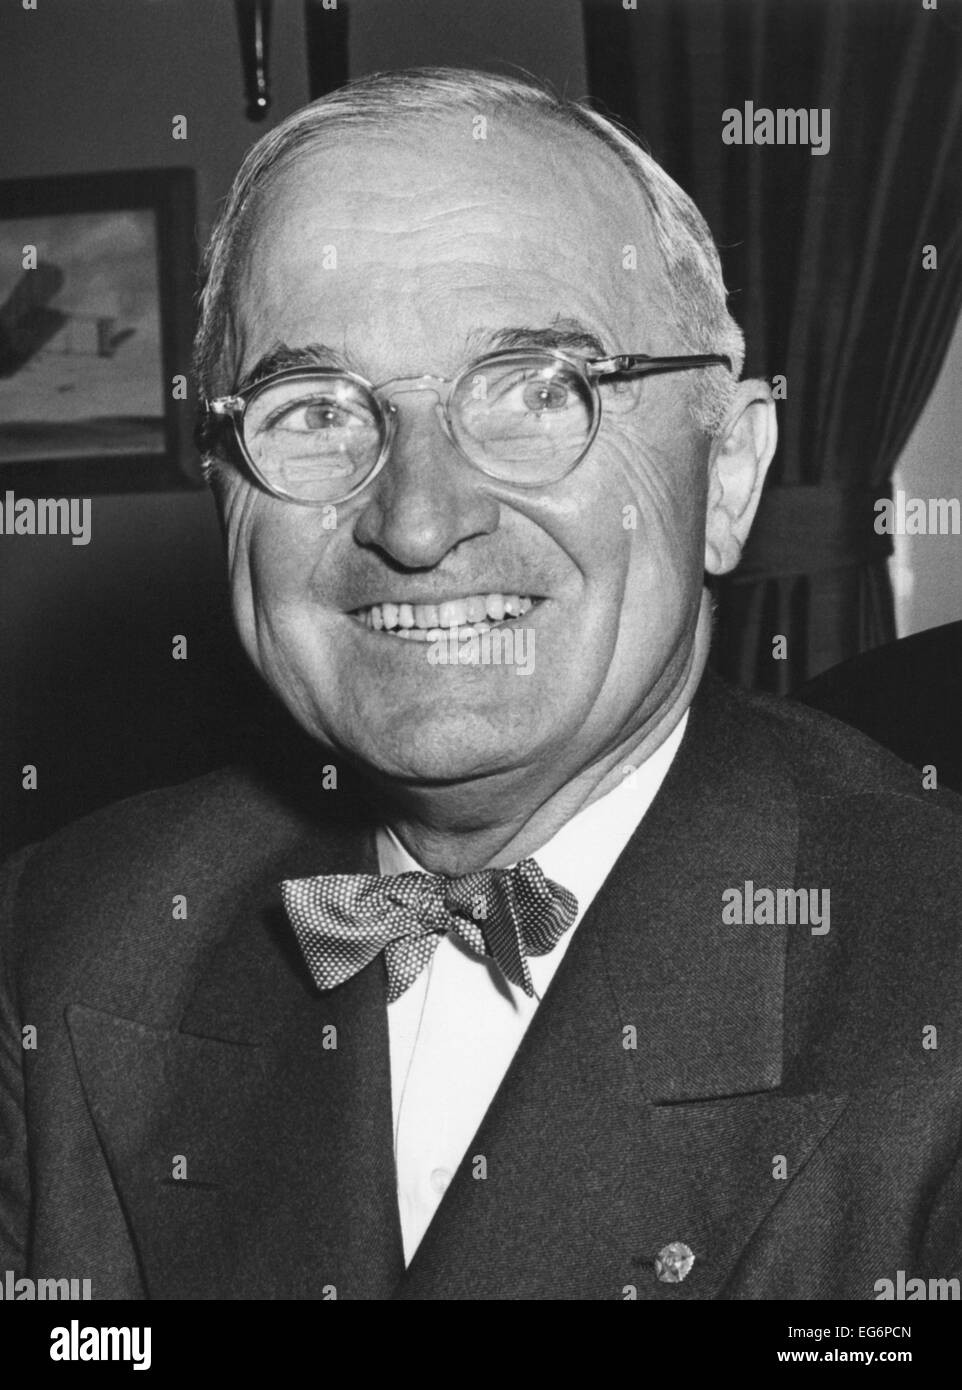 Harry Truman starting his 6th year as U.S. President with a smile. Photo taken at Truman's White House office on April 12, Stock Photo